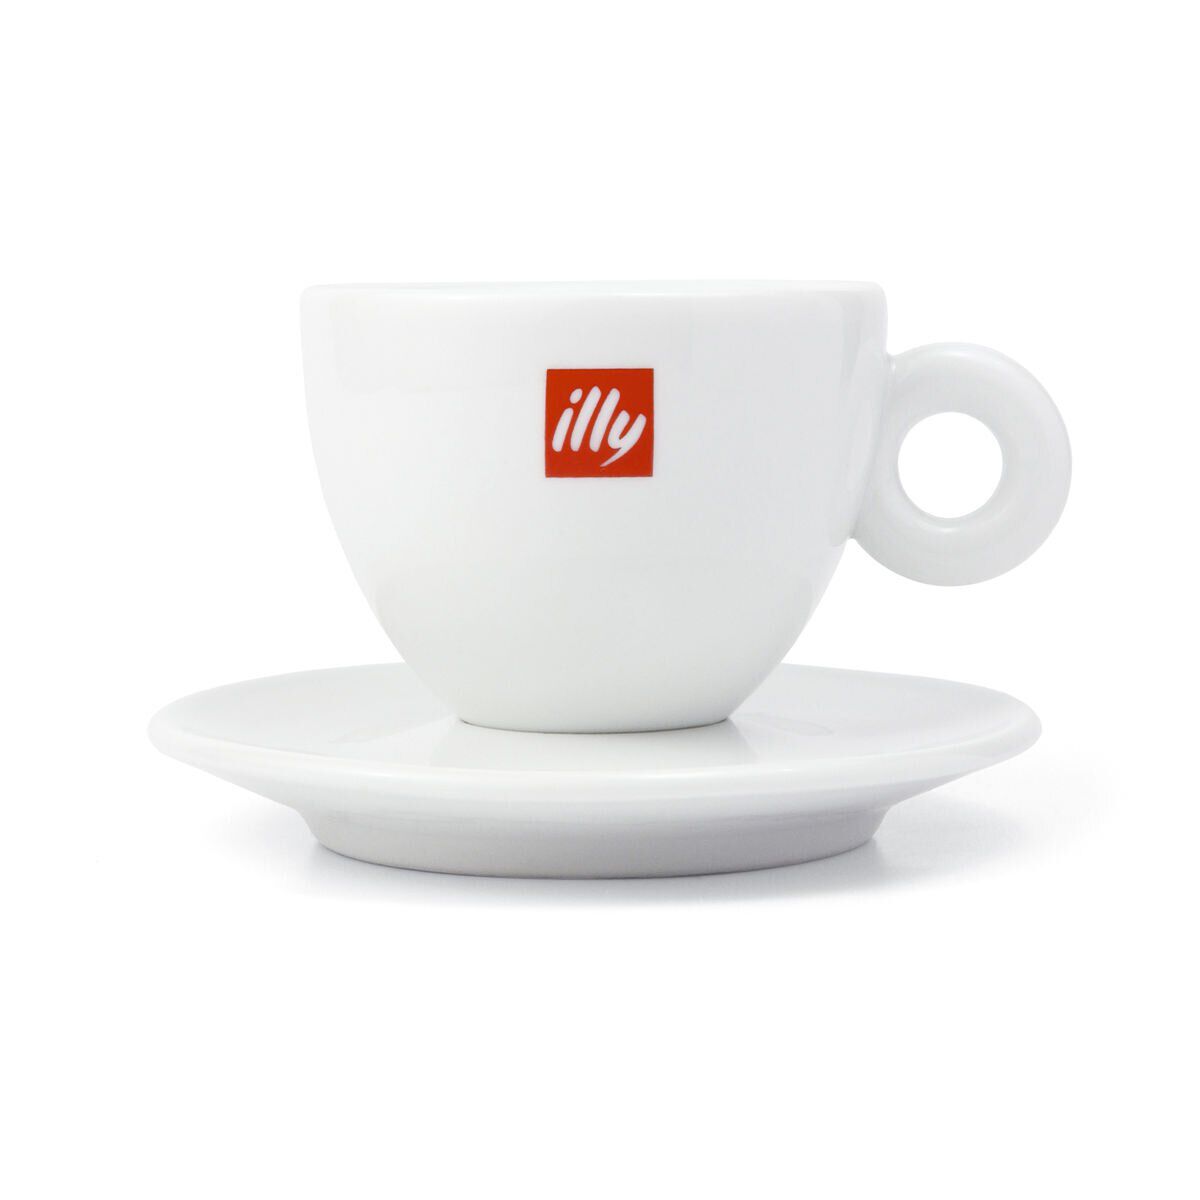 Illy Illy Italy Logo 2 oz Set of 2. White Espresso Cup Red letters 